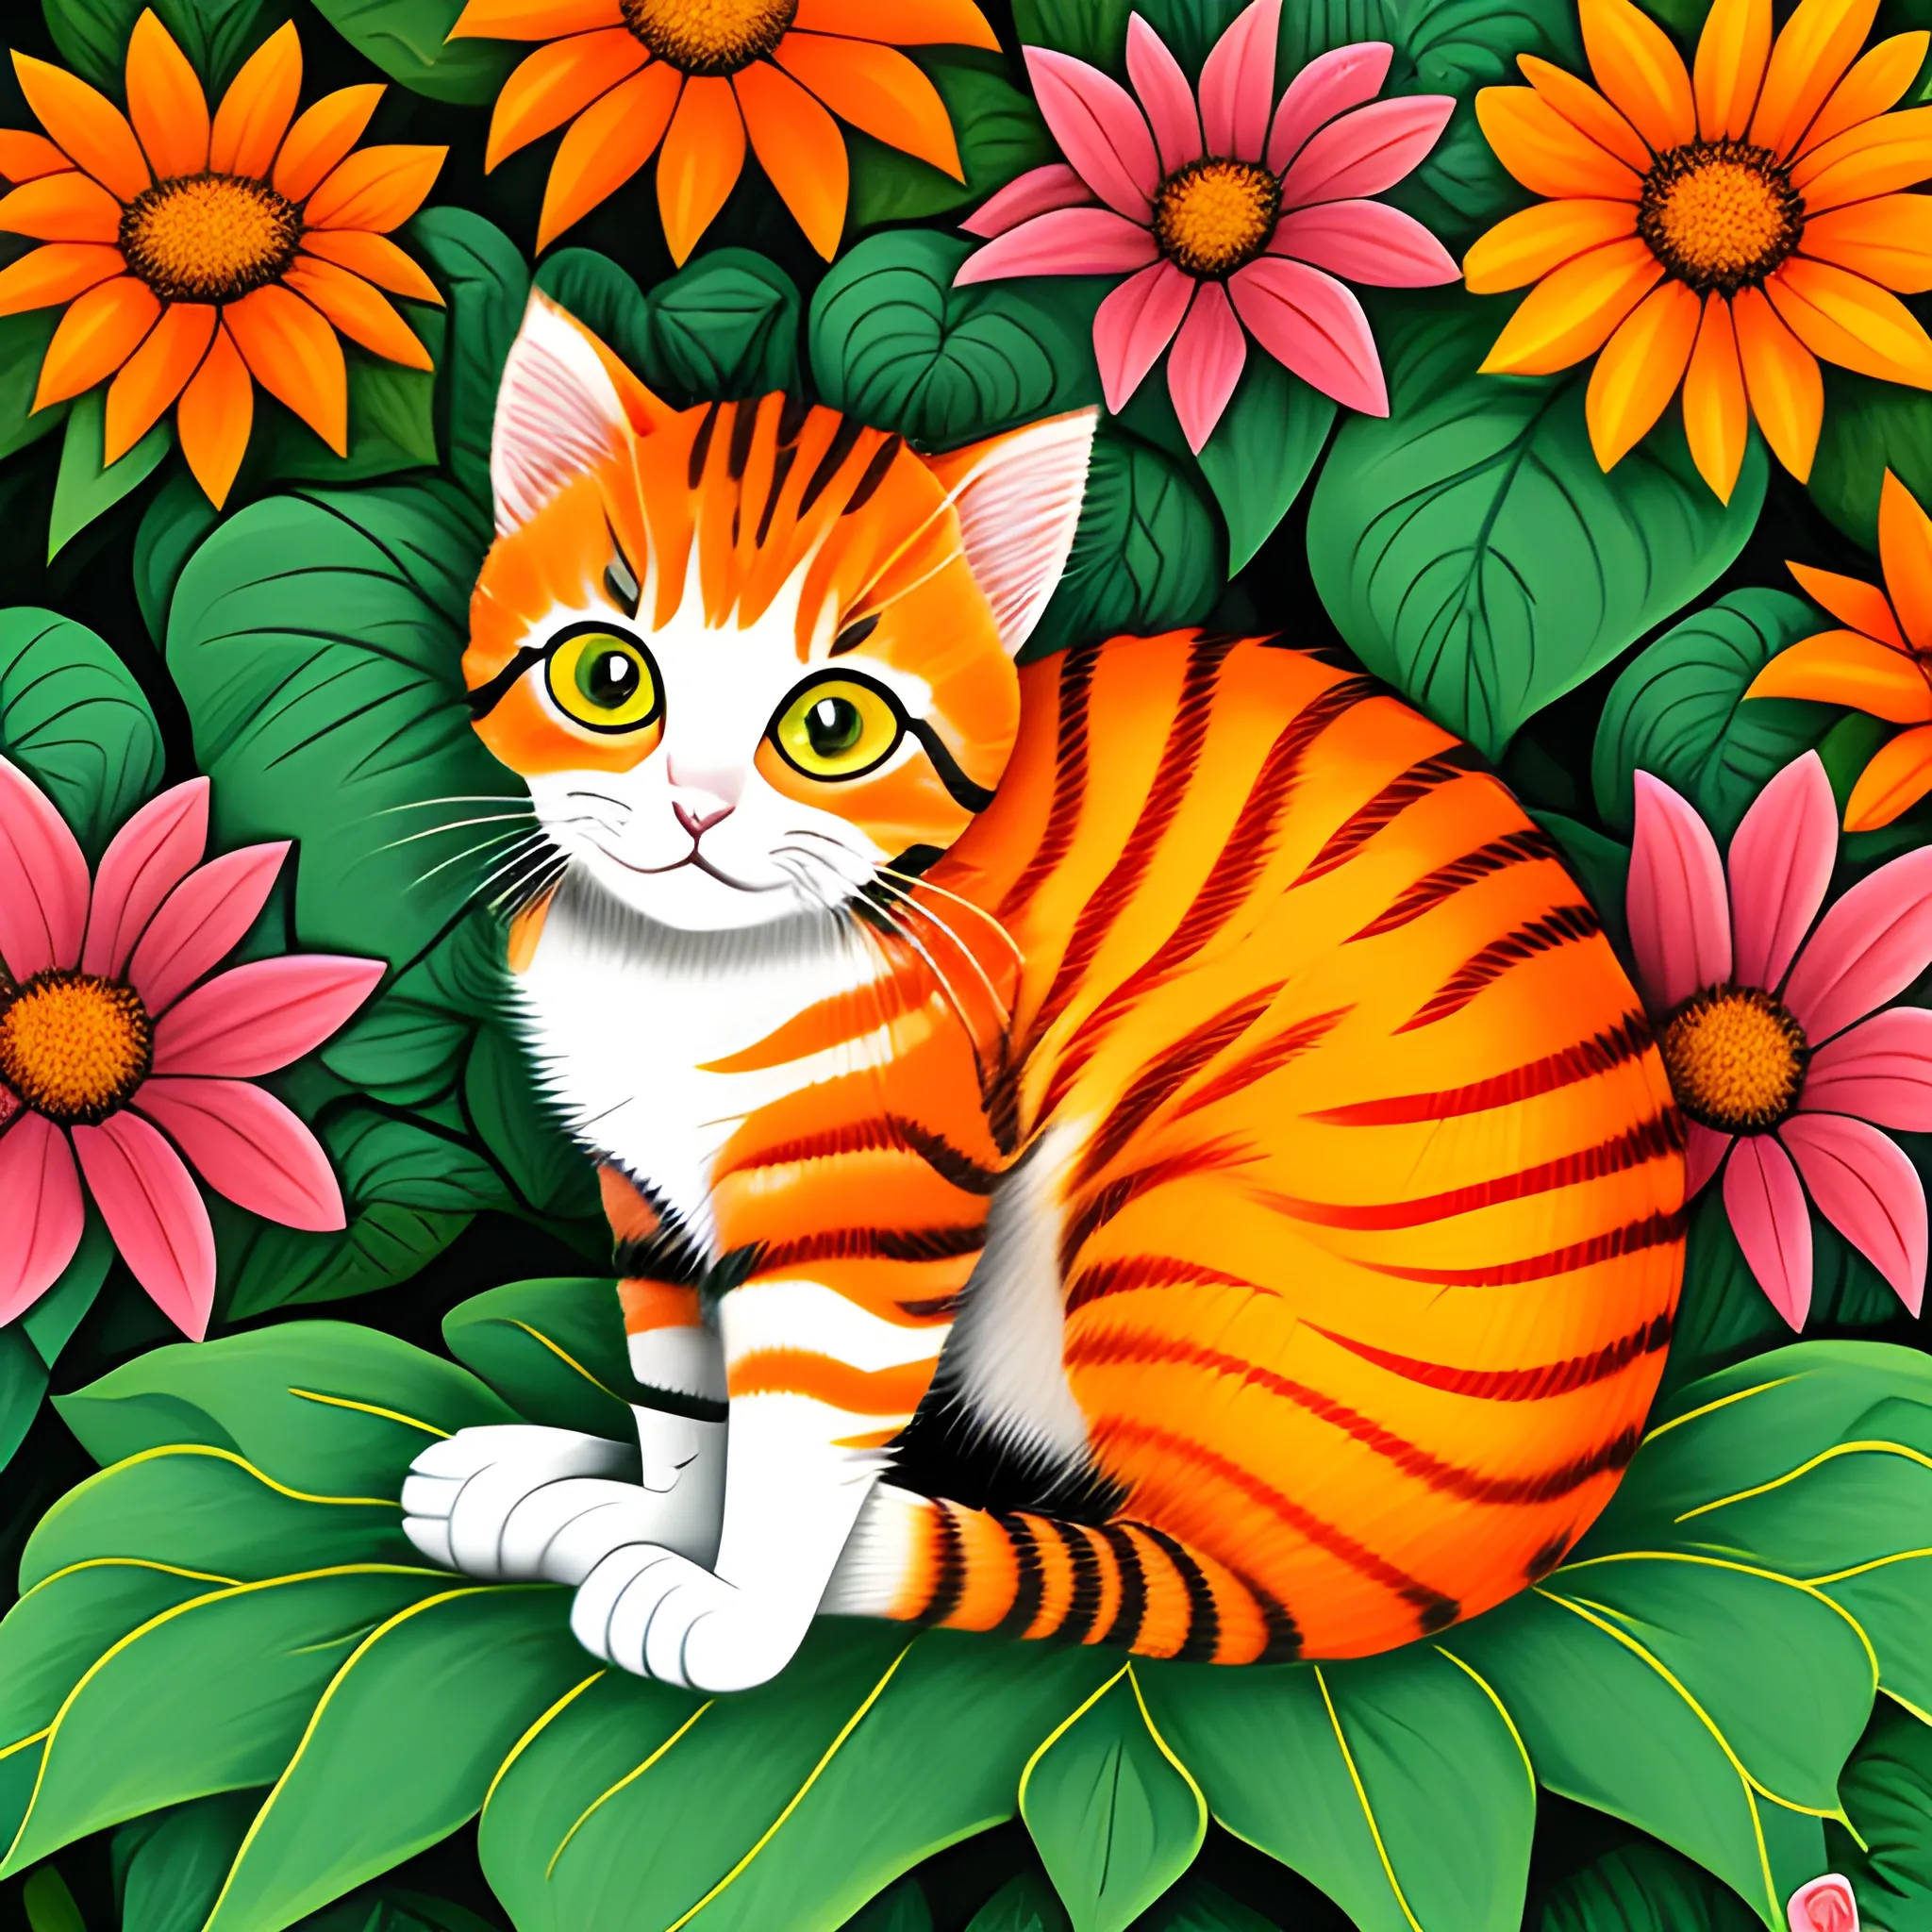 drawing of small kitten with bent head in orange color with stripes sitting on a big leaf in a garden full of flowers in daytime,Cartoon